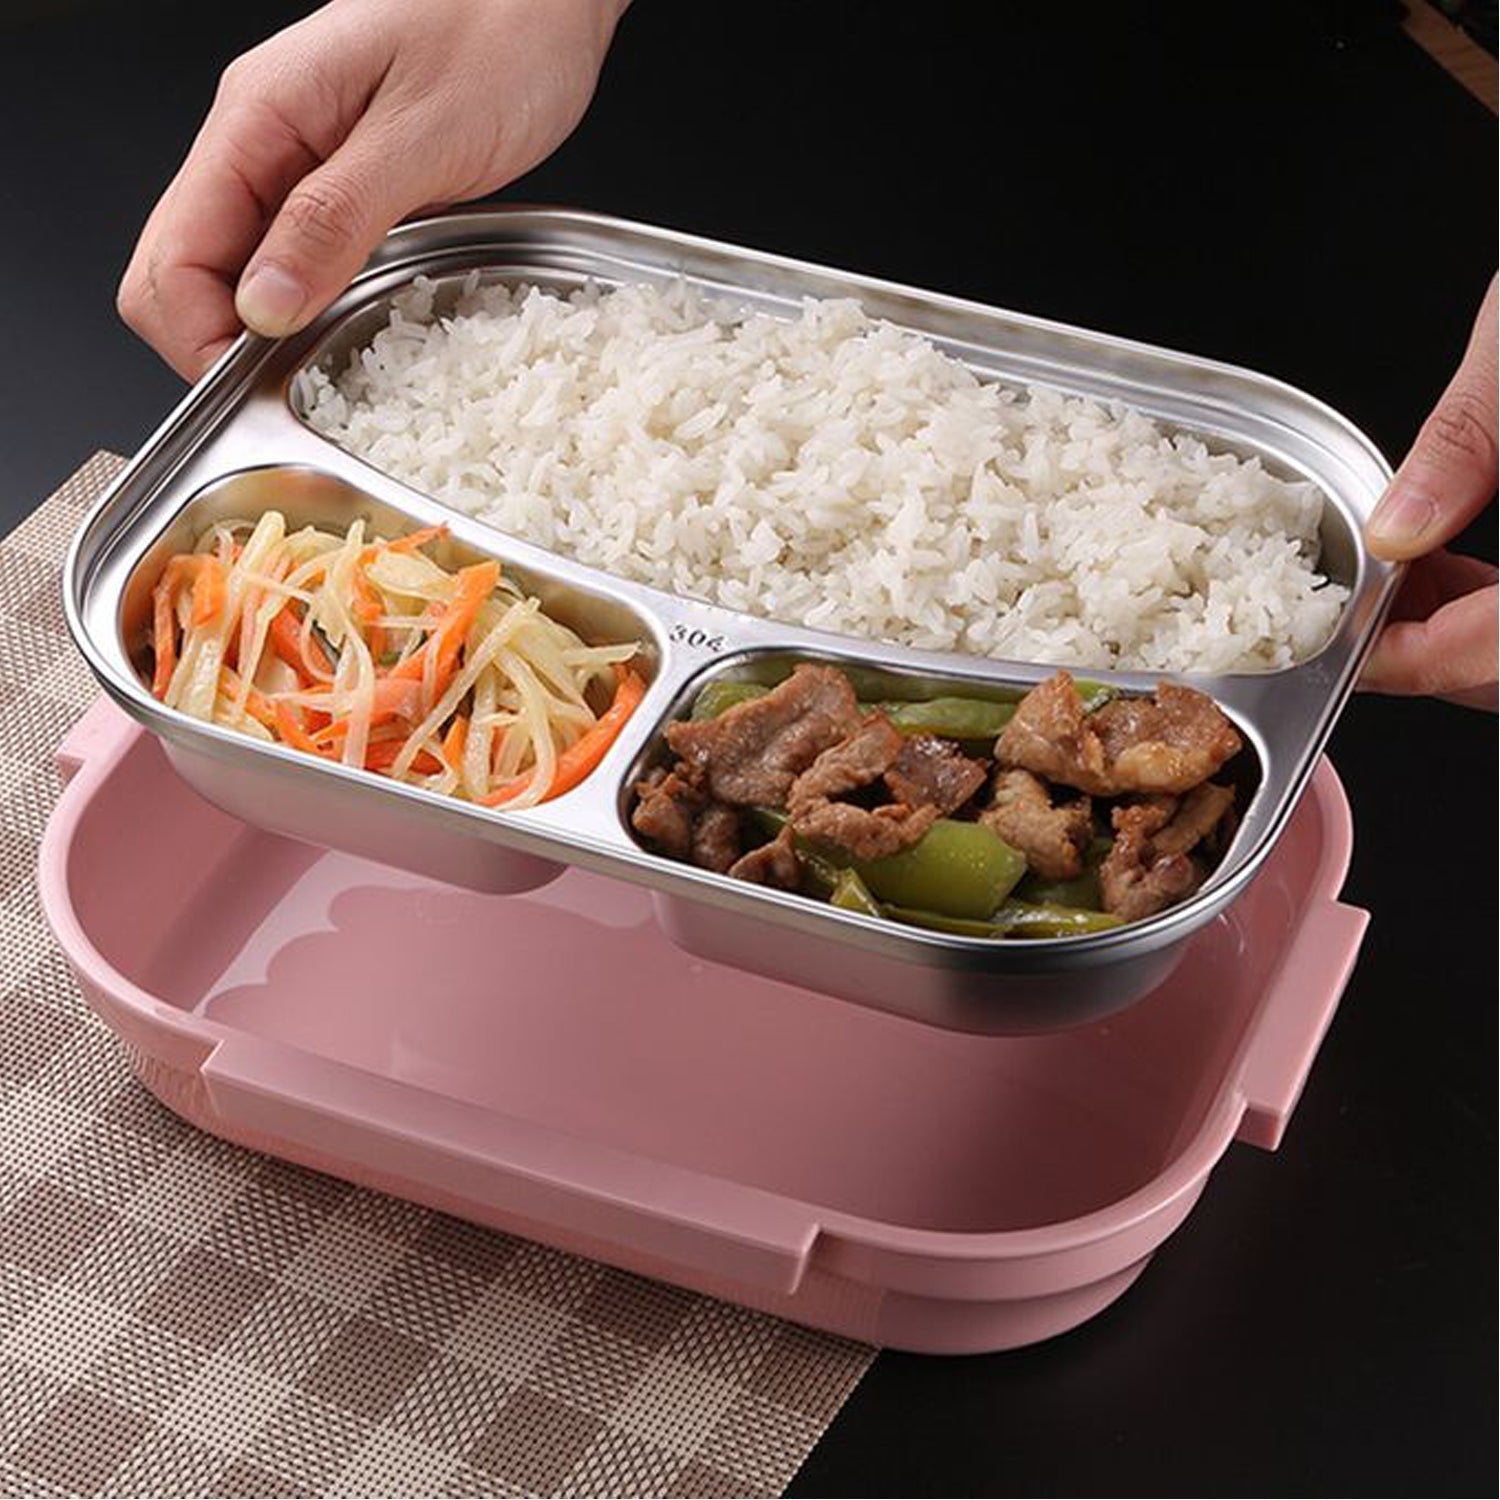 2041 Pink Lunch Box for Kids and adults, Stainless Steel Lunch Box with 3 Compartments With spoon slot. DeoDap